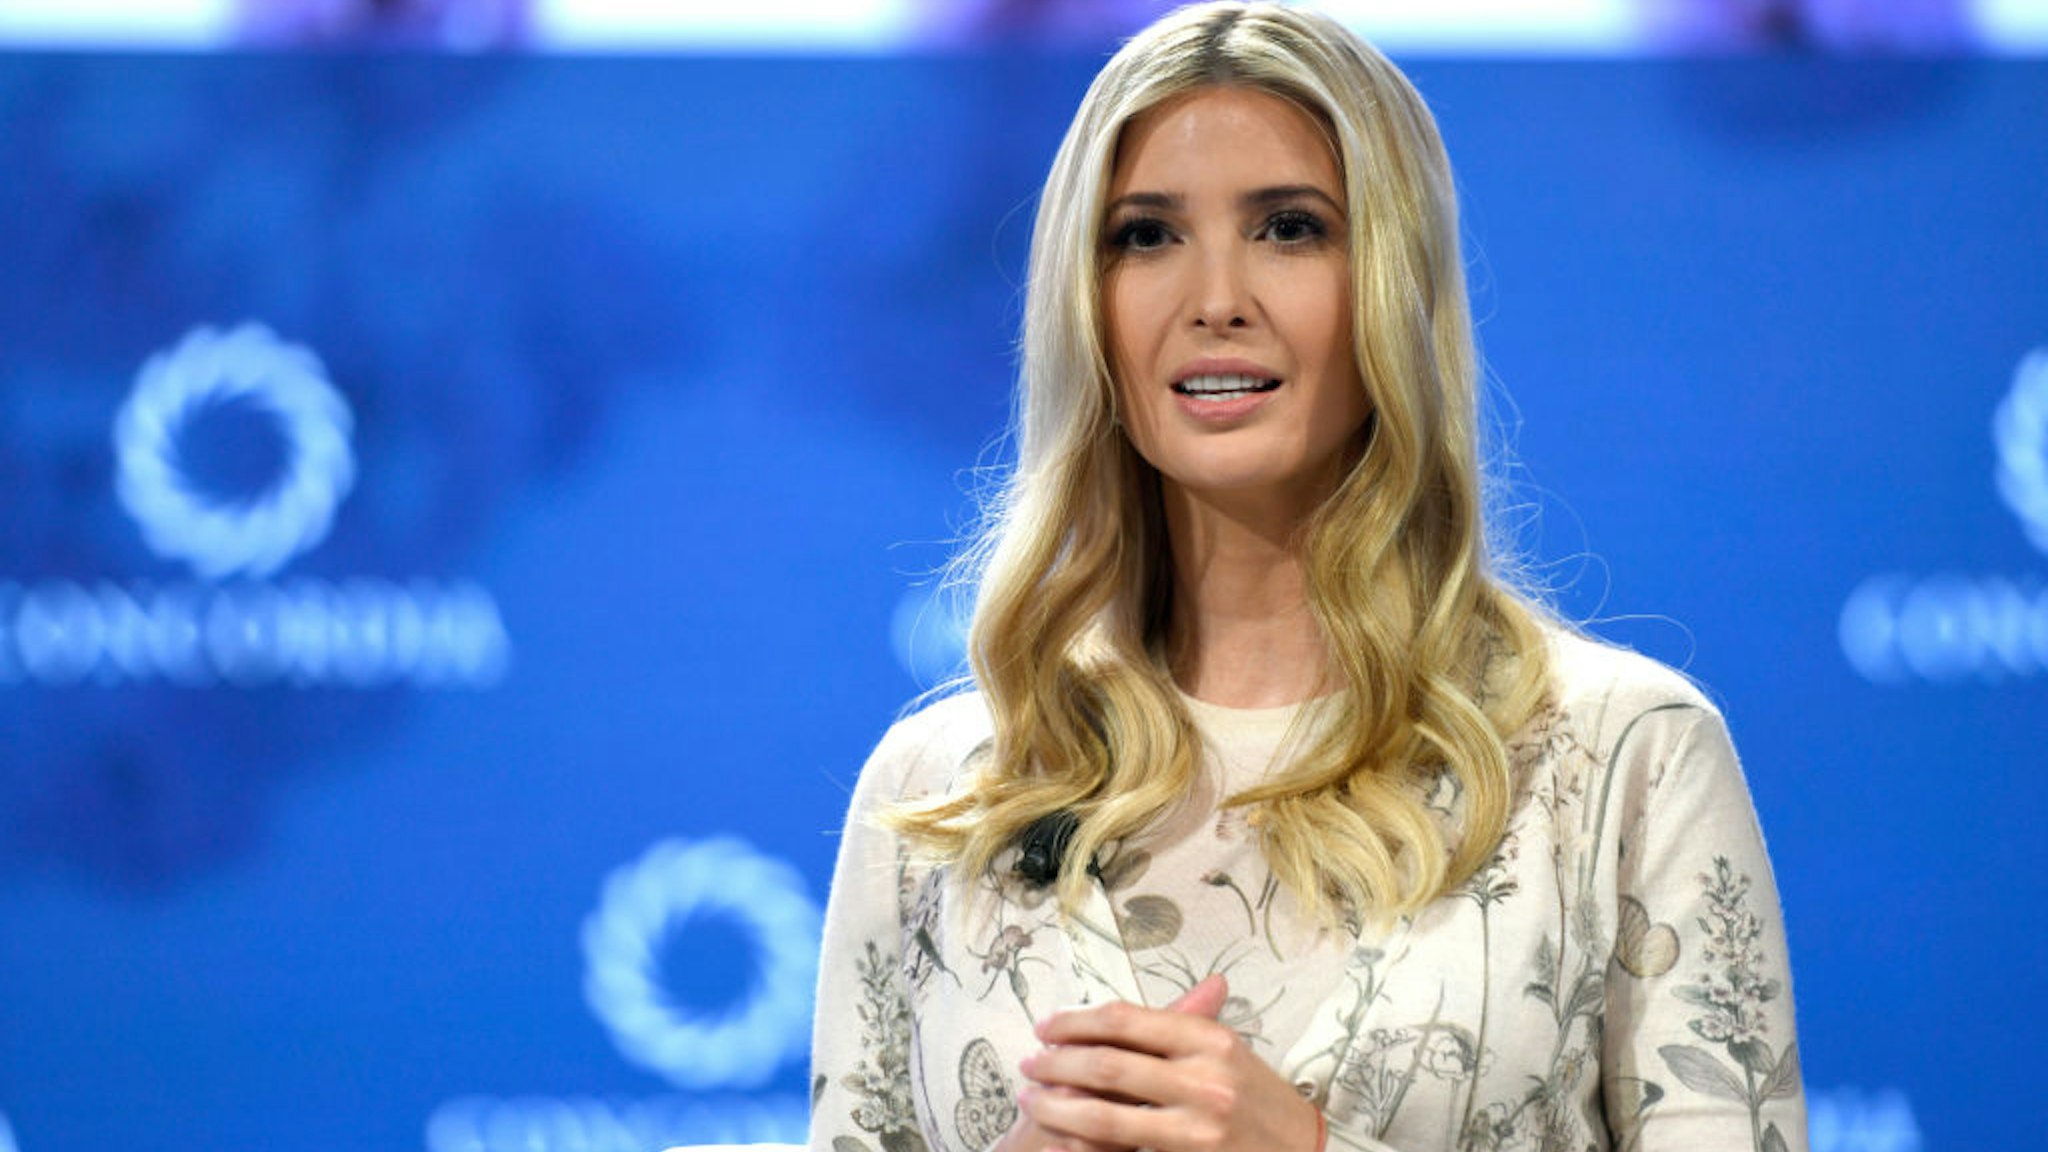 Advisor to the President Ivanka Trump speaks onstage during the 2018 Concordia Annual Summit - Day 1 at Grand Hyatt New York on September 24, 2018 in New York City.